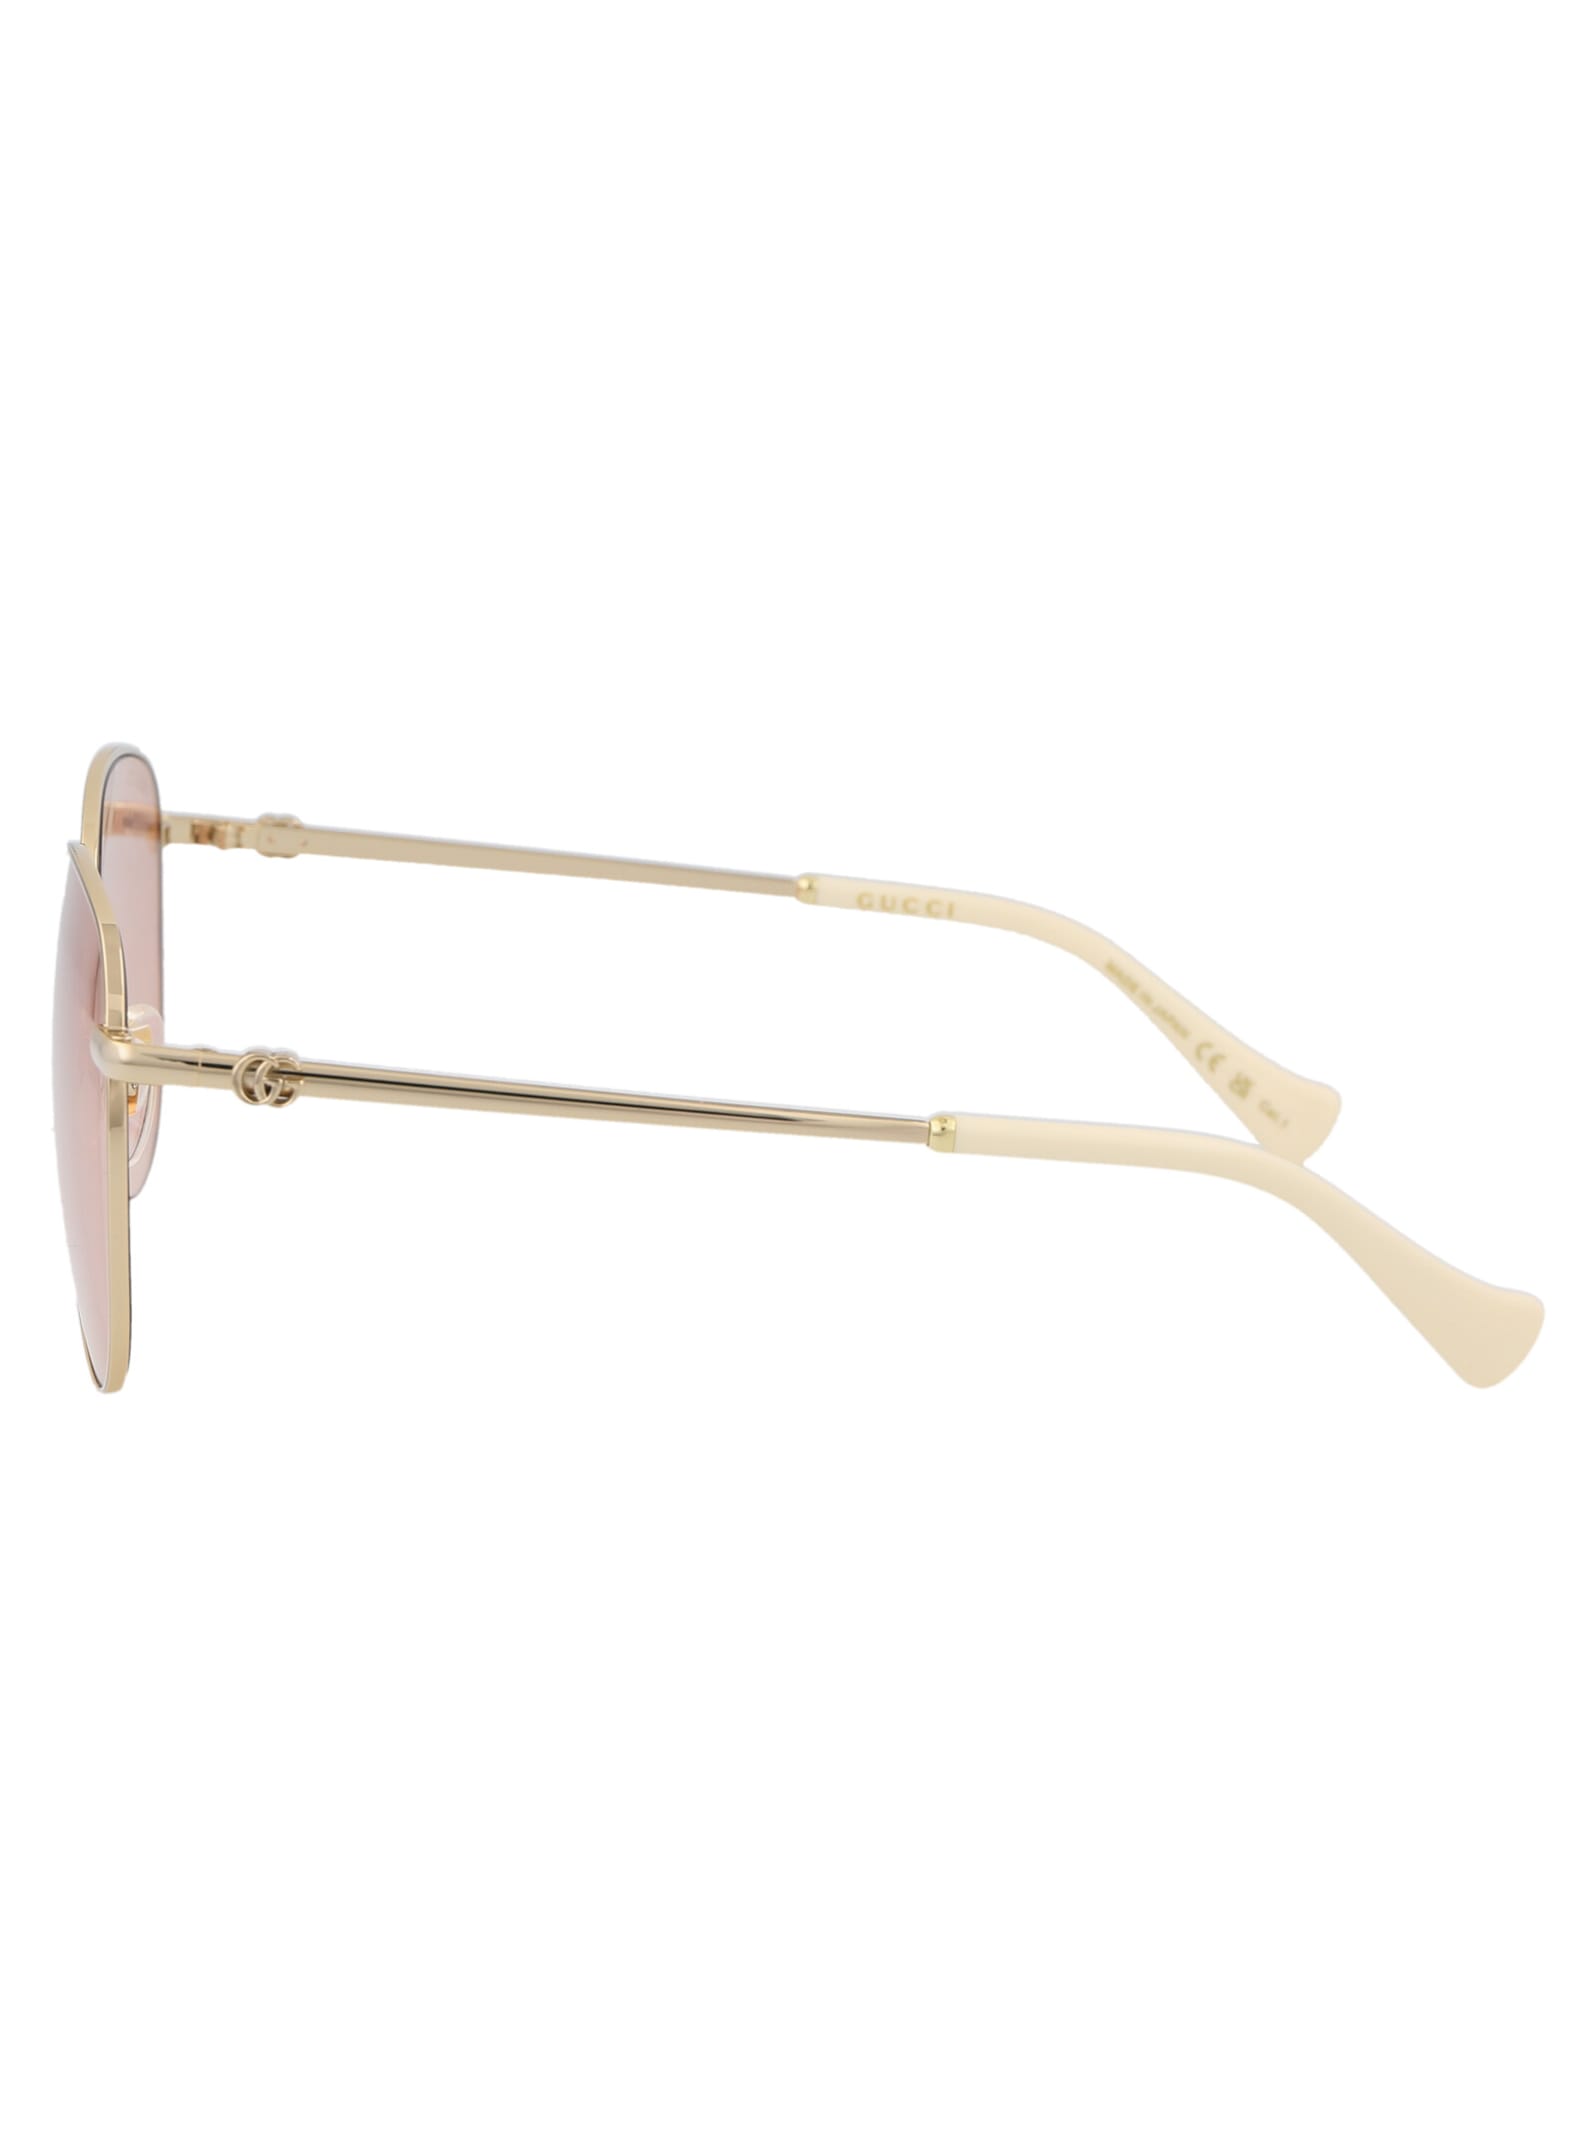 Shop Gucci Gg1419s Sunglasses In 003 Gold Gold Pink